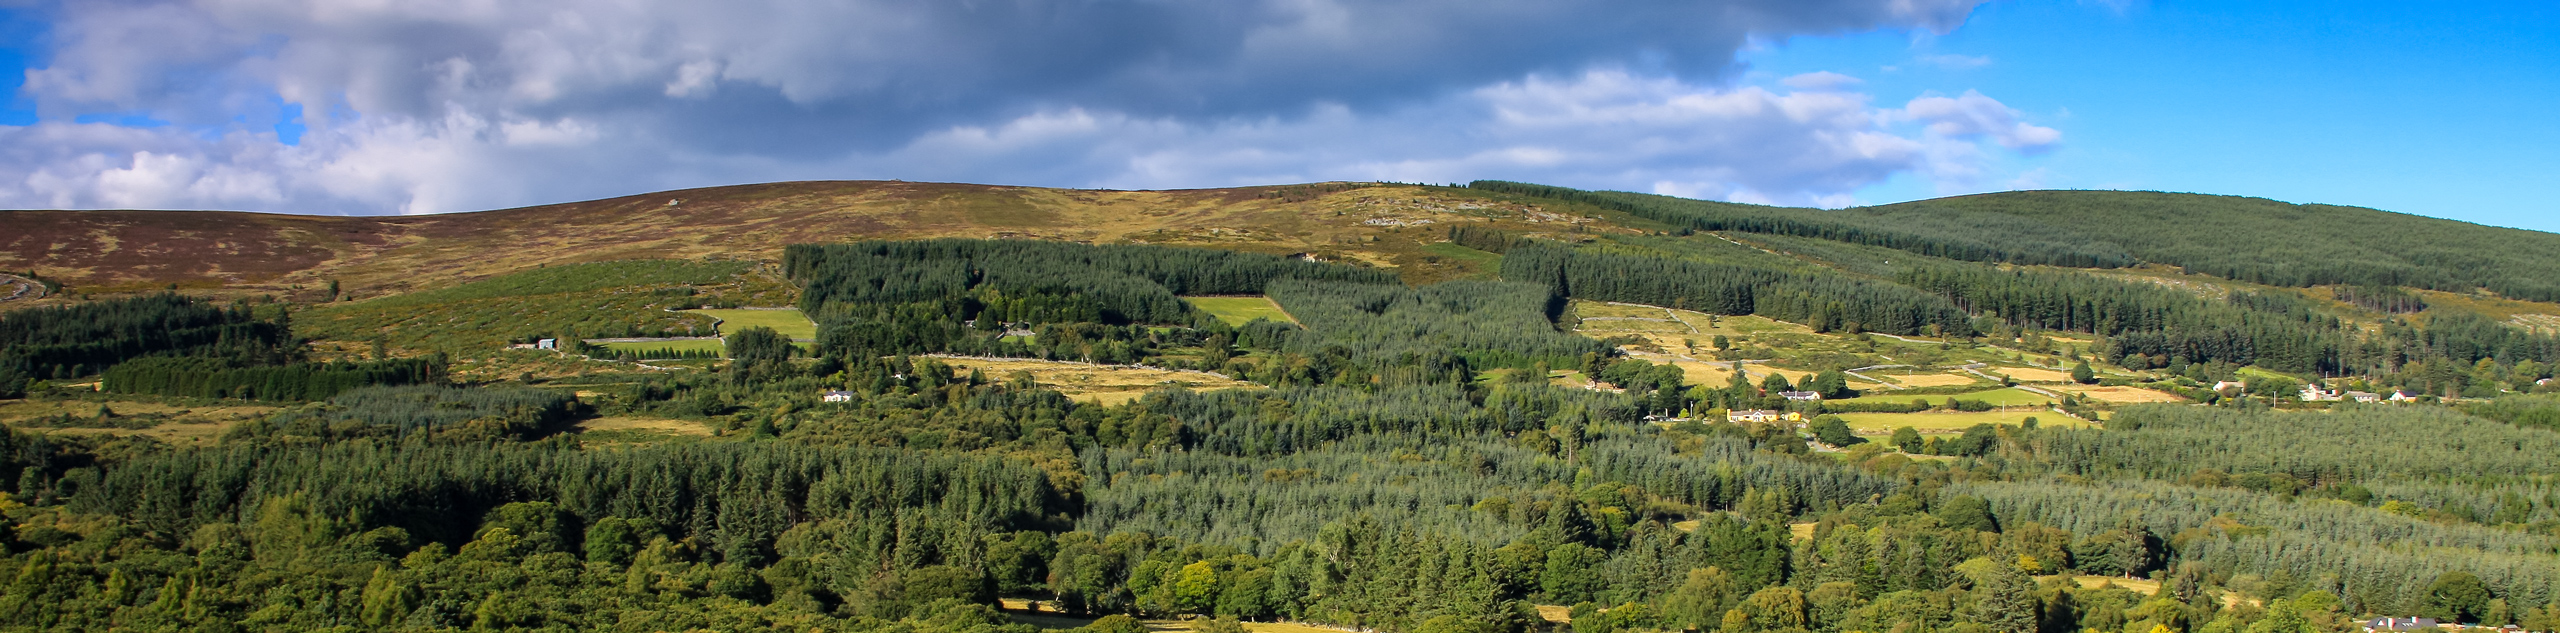 5-Day Self-Guided Wicklow Way Hiking Tour